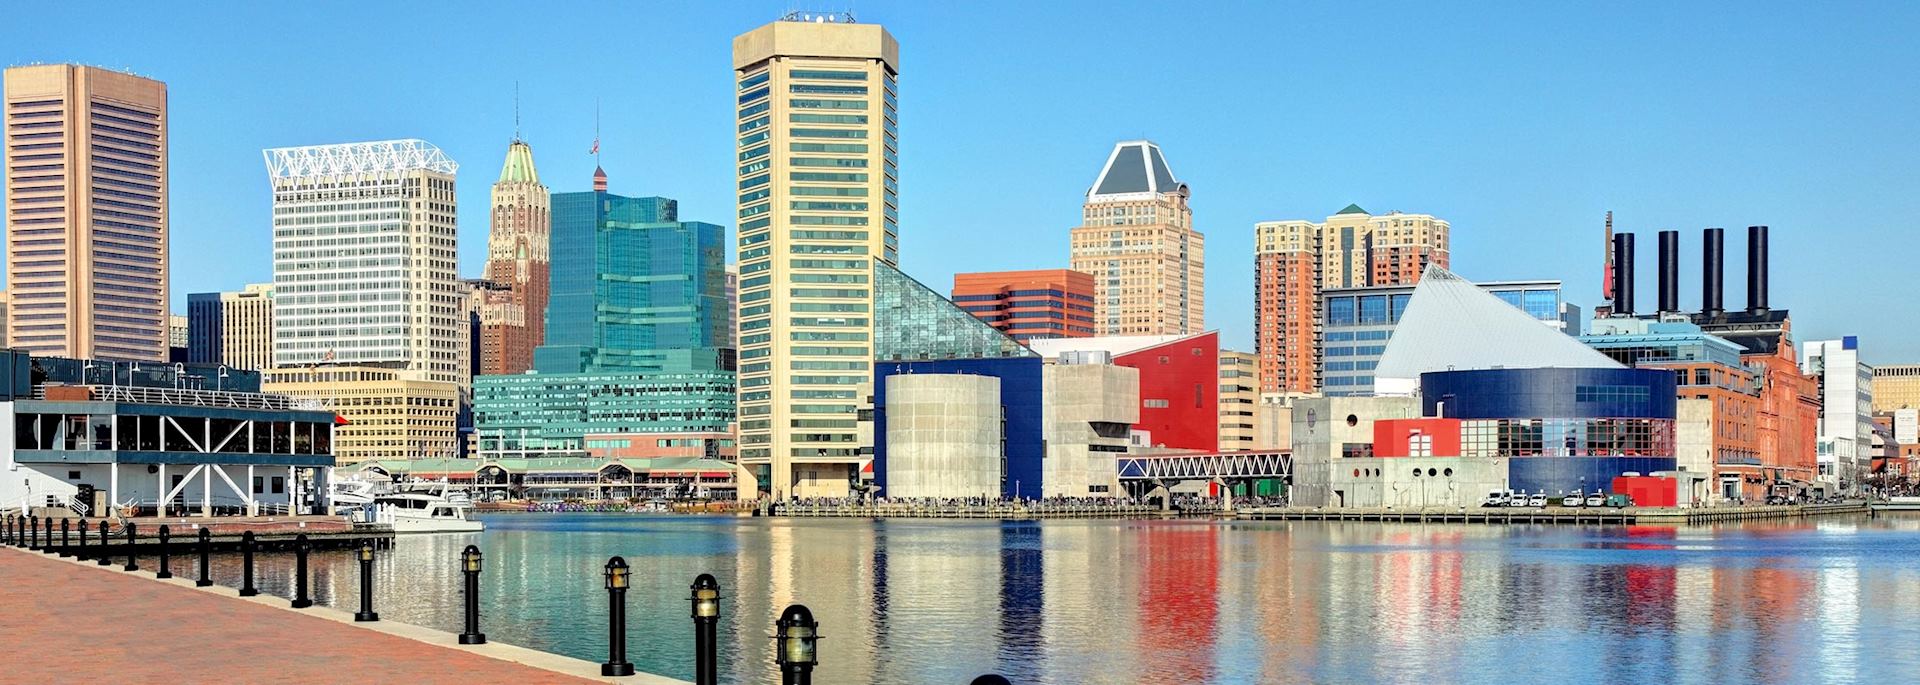 Baltimore's inner harbour, the USA